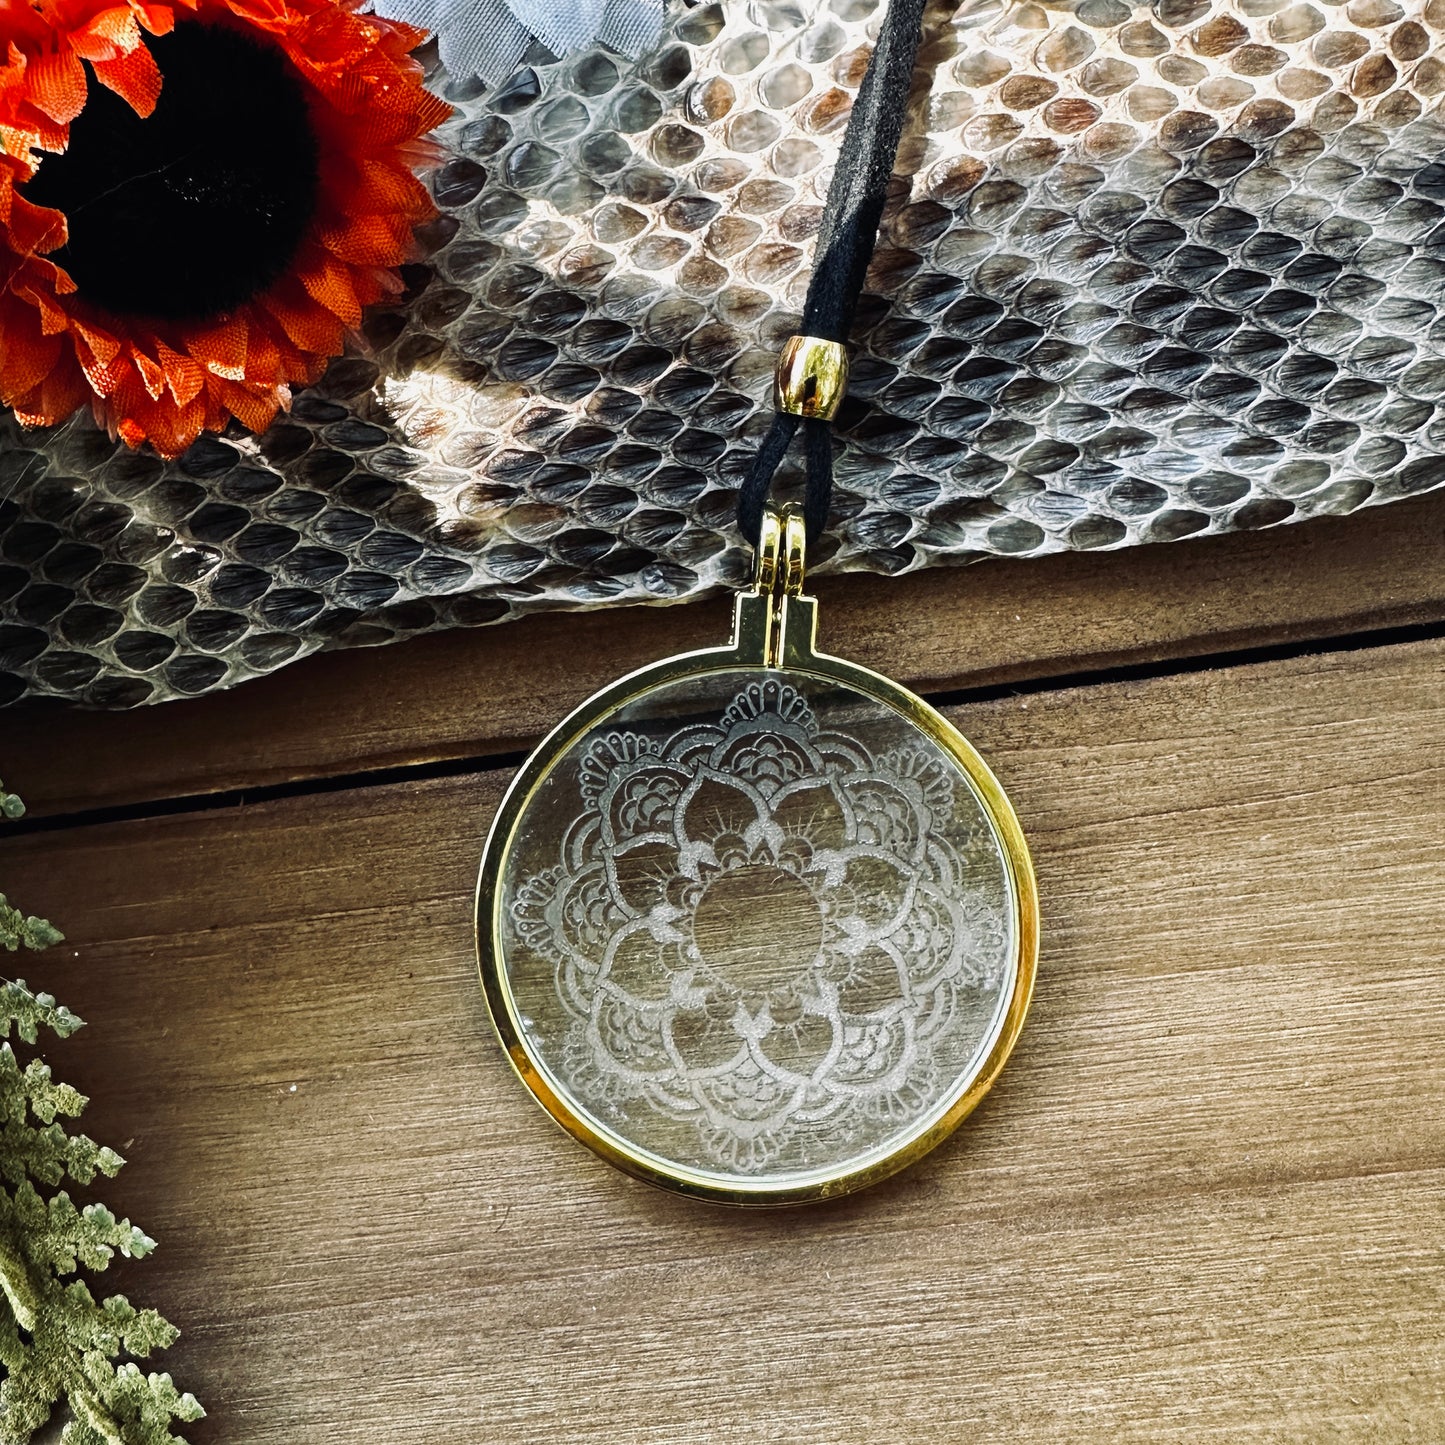 Flower Mandala Necklace, Solar Lighter, Magnifying Glass Necklace, Sustainable Jewelry, Cannabis Accessory